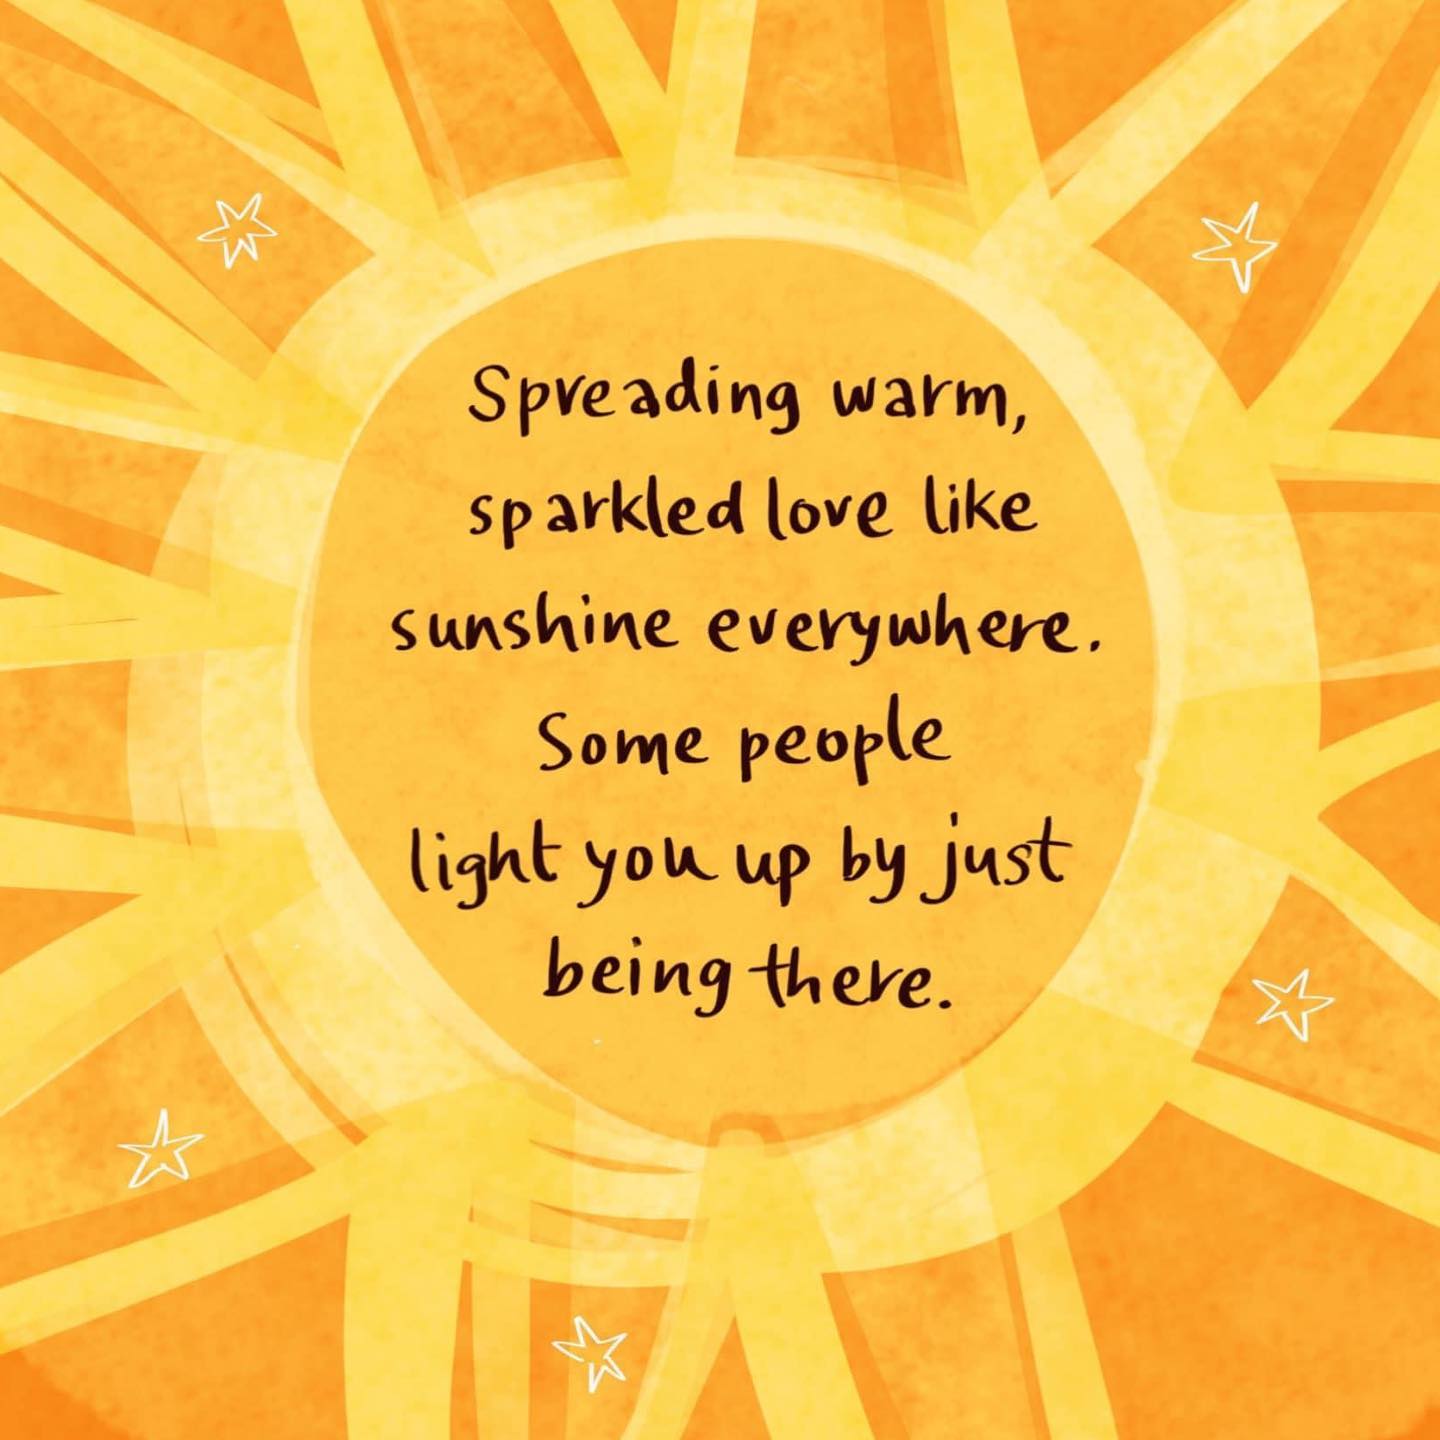 Spreading warm, sparkled love like sunshine everywhere. 

Some people light you up by just being there.